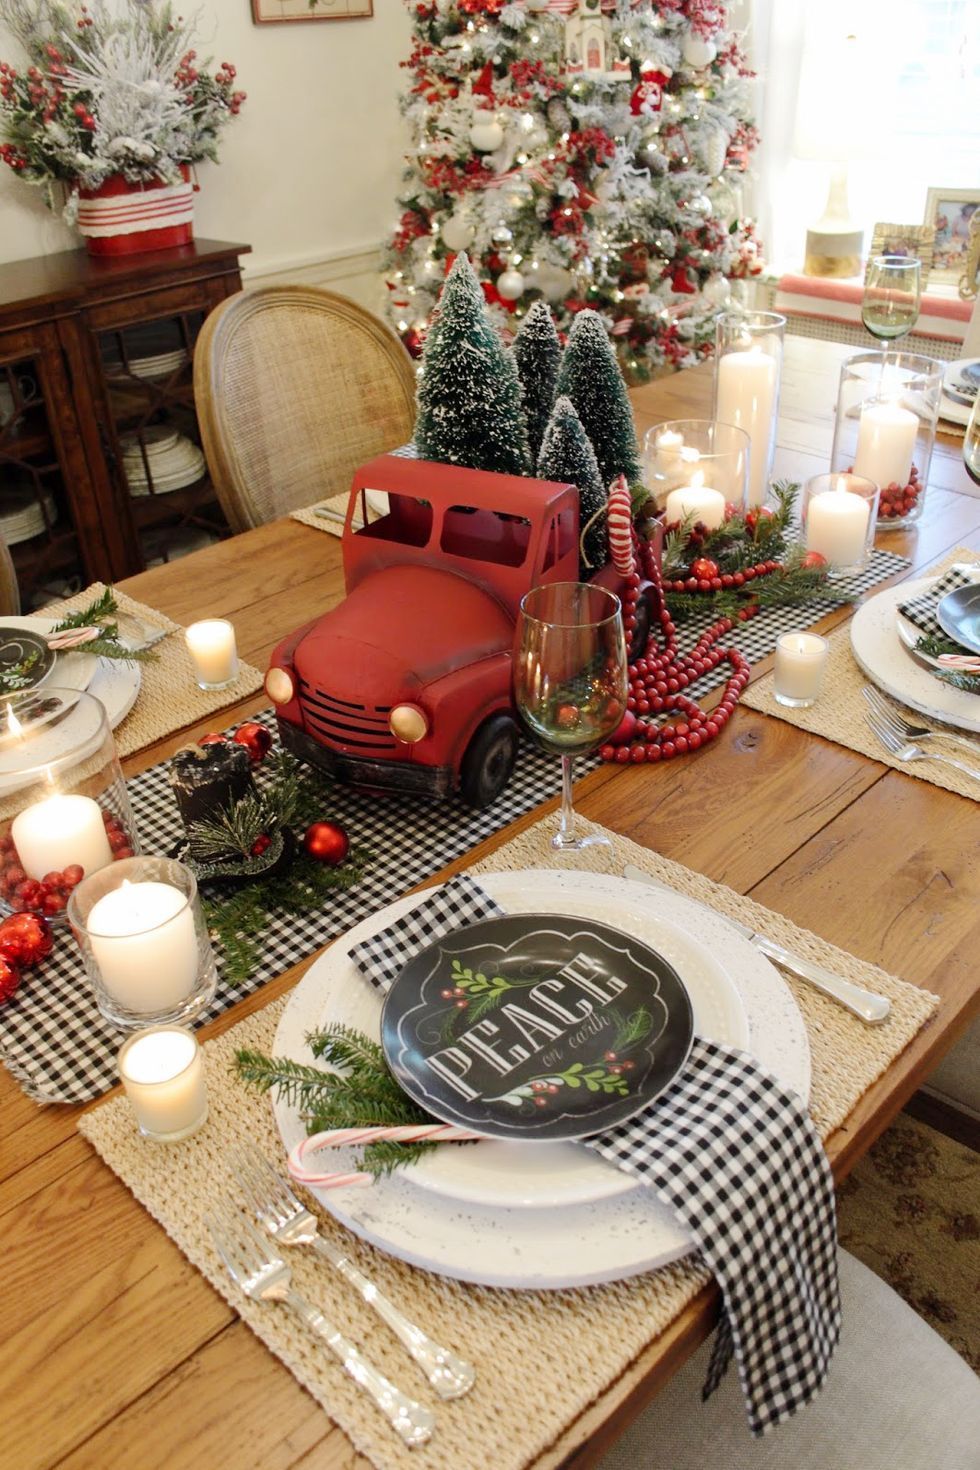 The Best Christmas Table Decorations for All Your Holiday Parties - The Best Christmas Table Decorations for All Your Holiday Parties -   18 diy Christmas table ideas